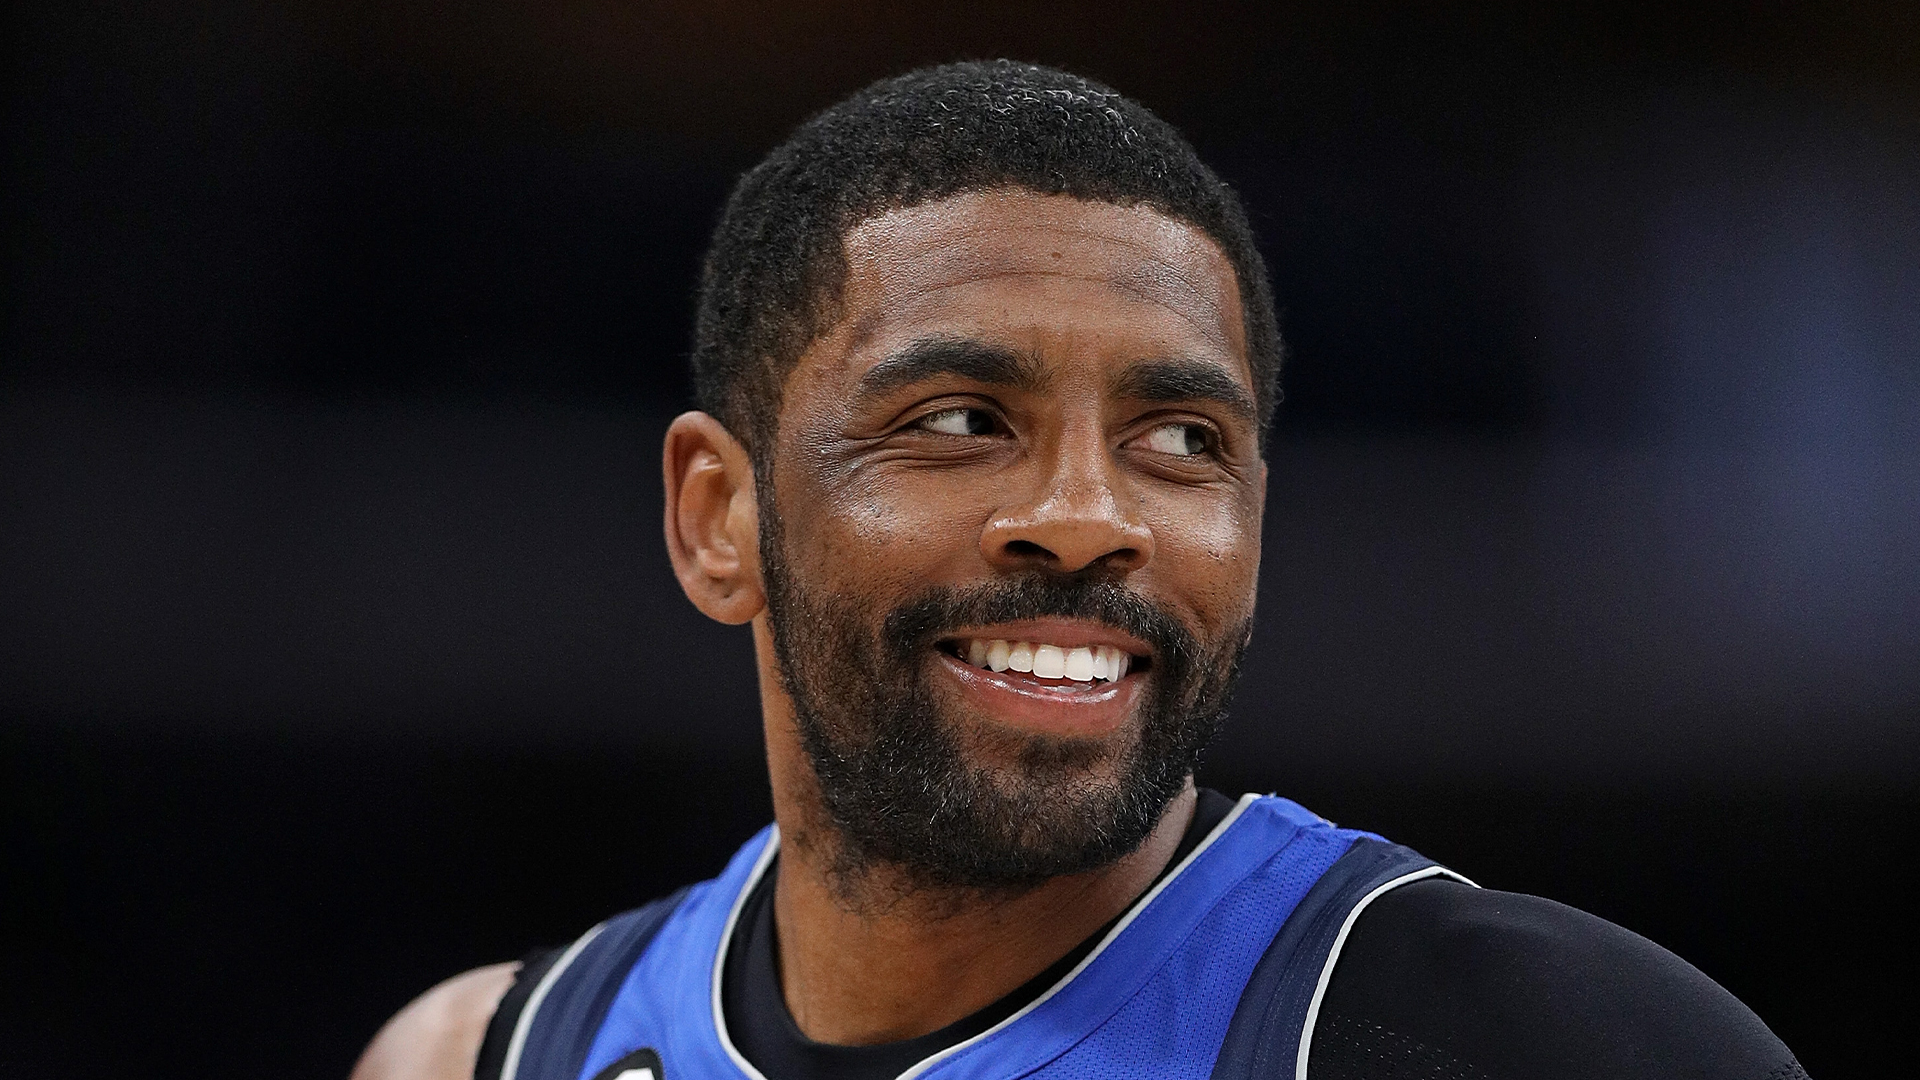 Kyrie Irving Claims His Nike Shoe Line Generated $2.6B In Revenue Over 7 Years